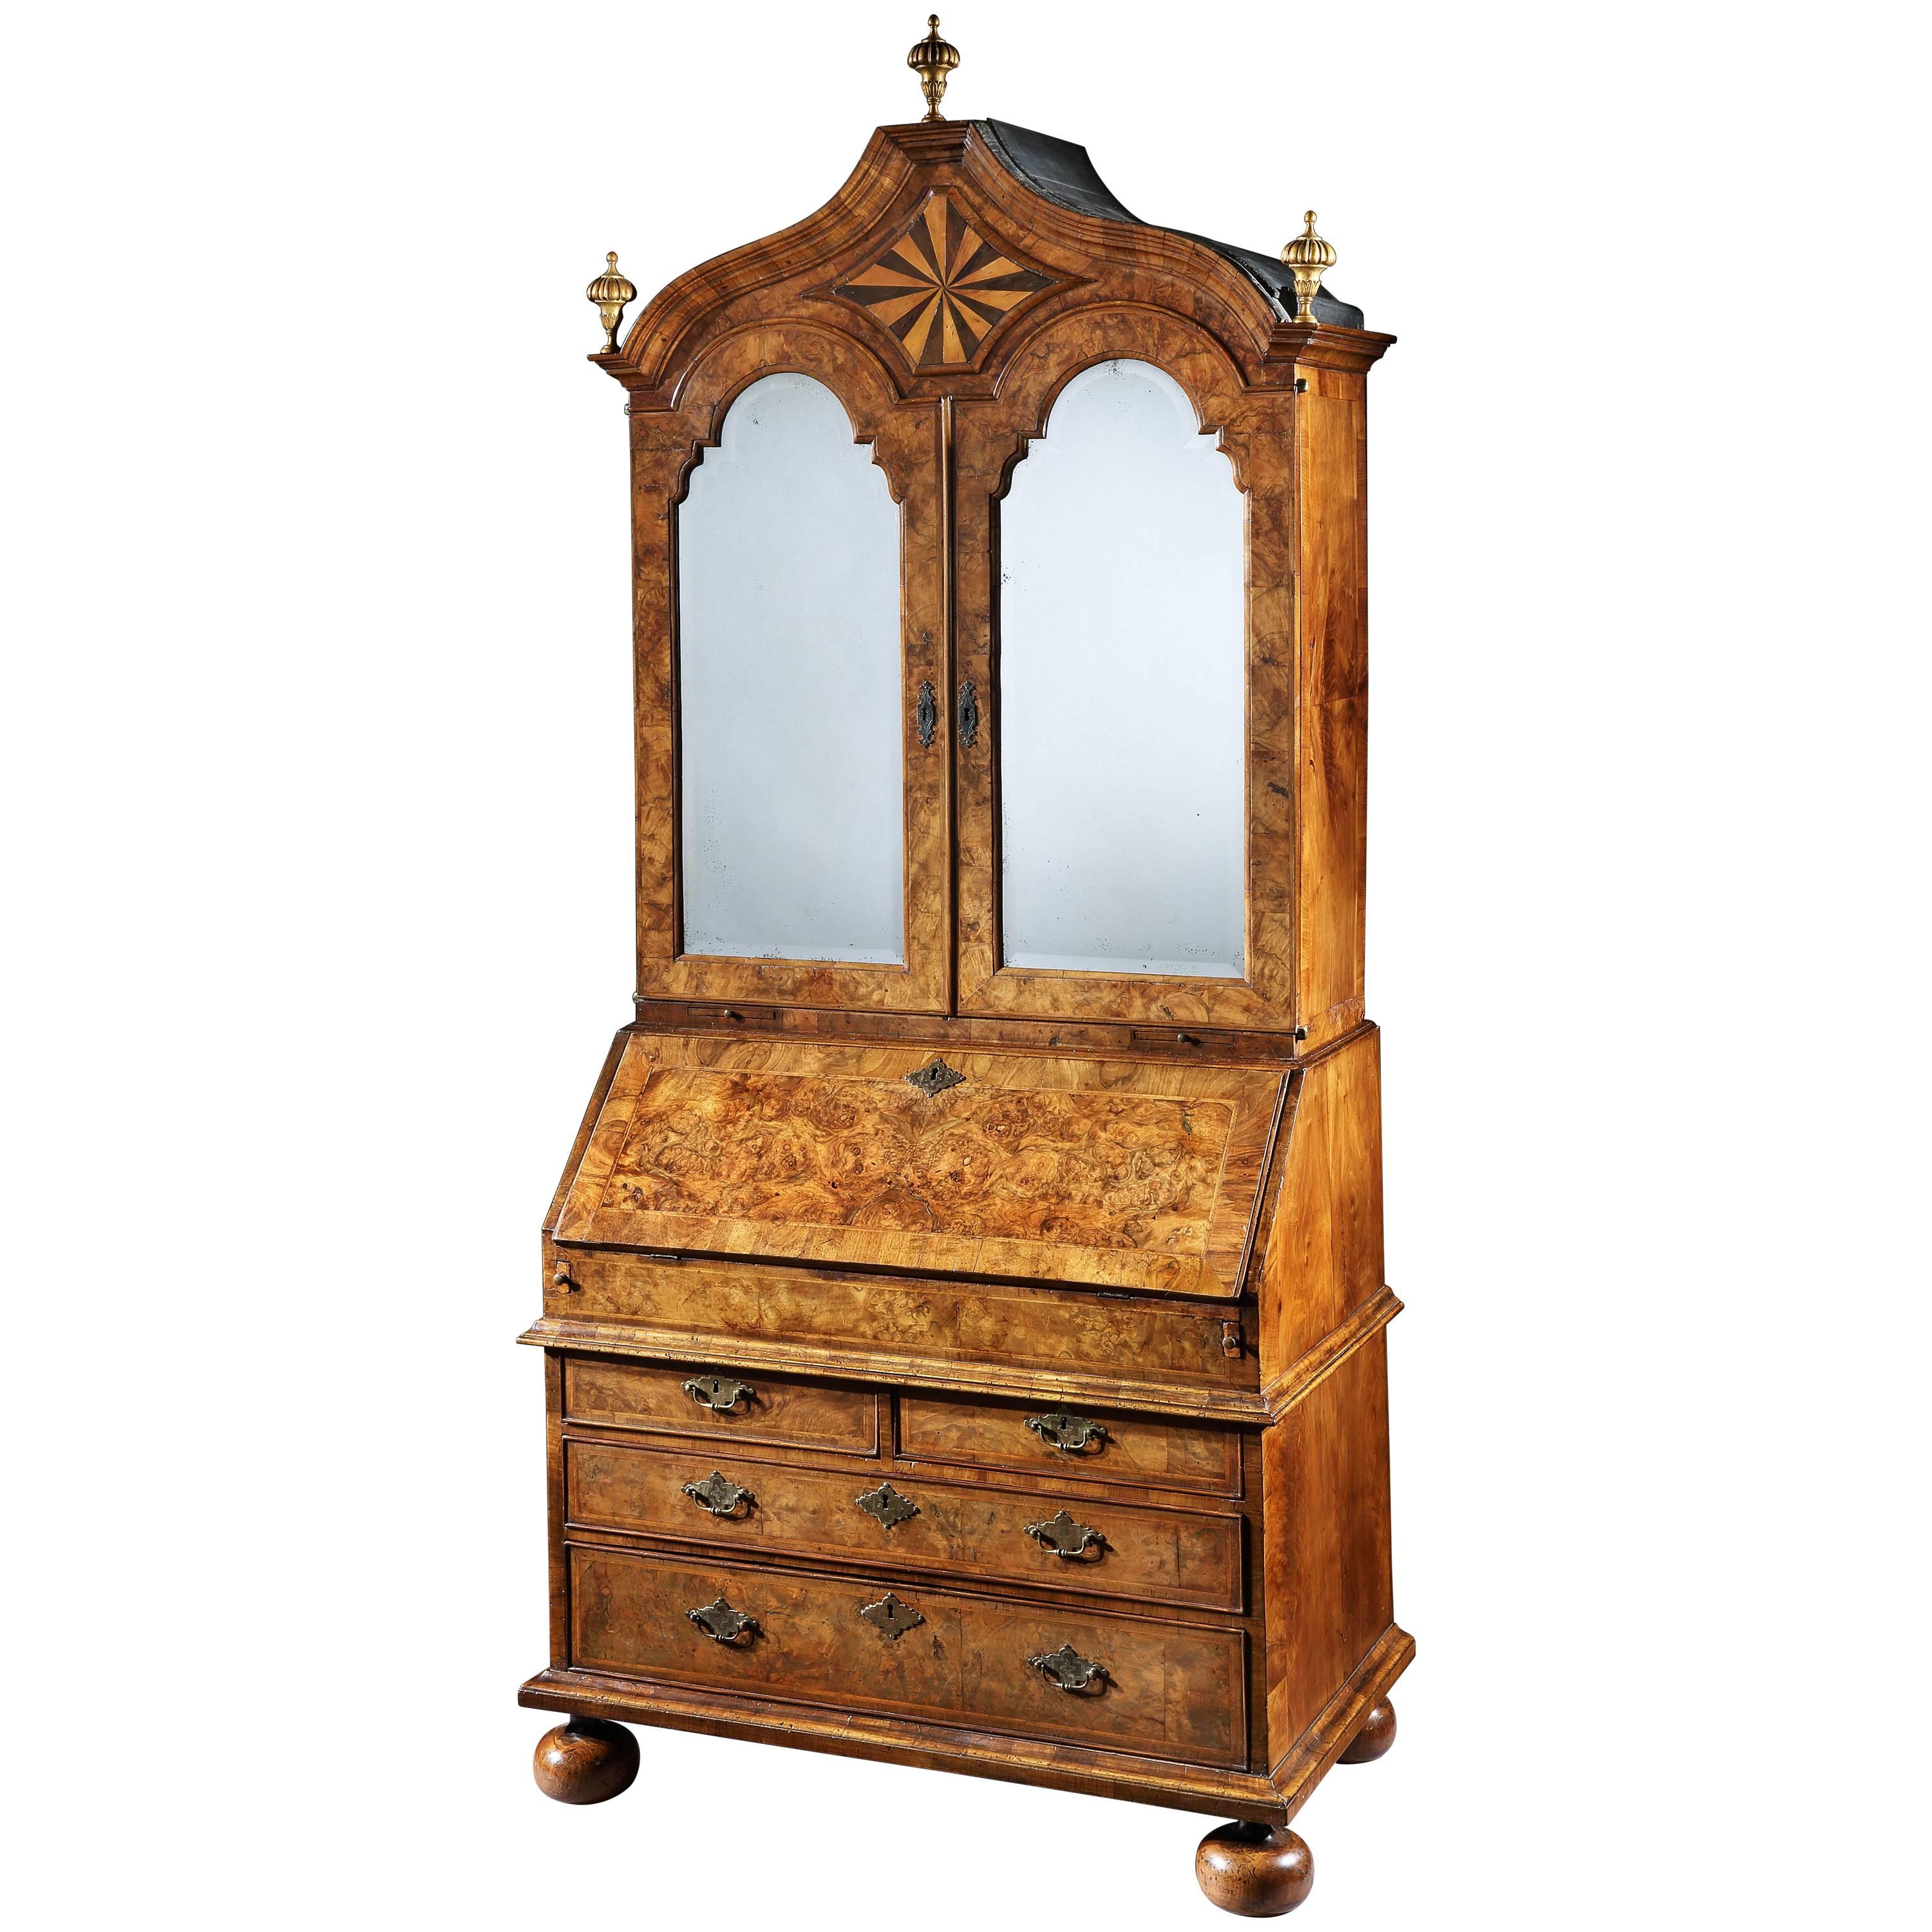 Superb William & Mary Period Walnut Domed Bureau Bookcase with Mirror Plates For Sale